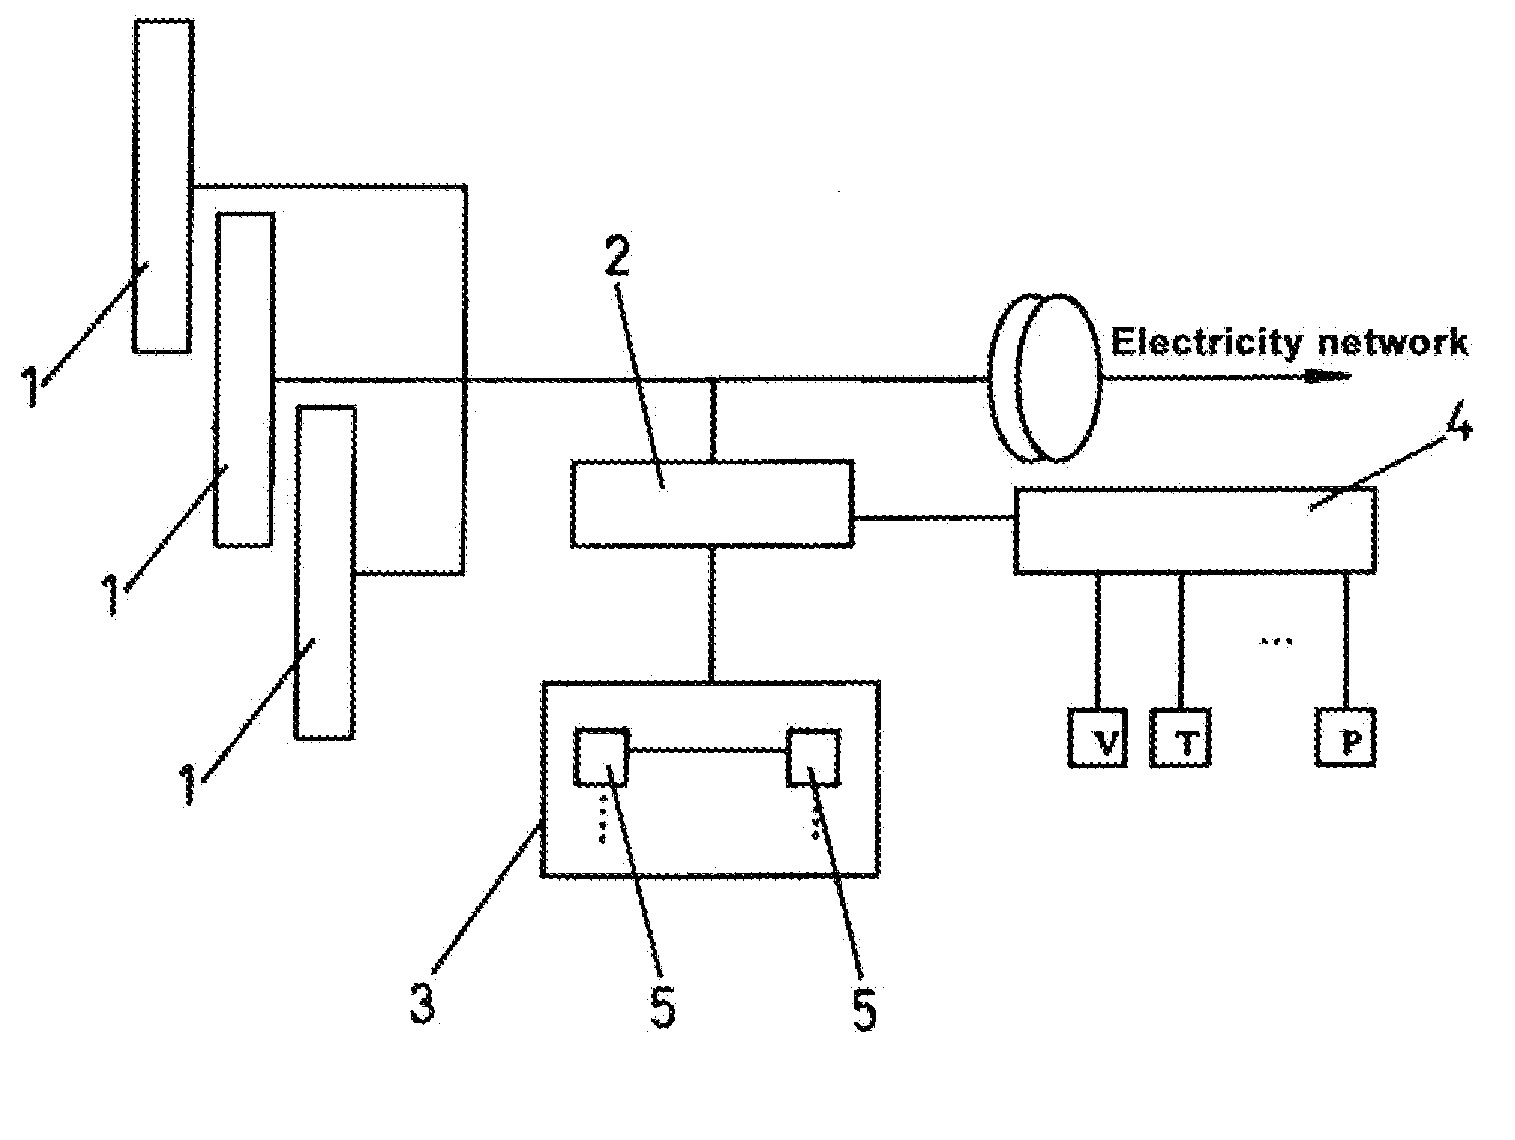 Production system for electric energy and hydrogen